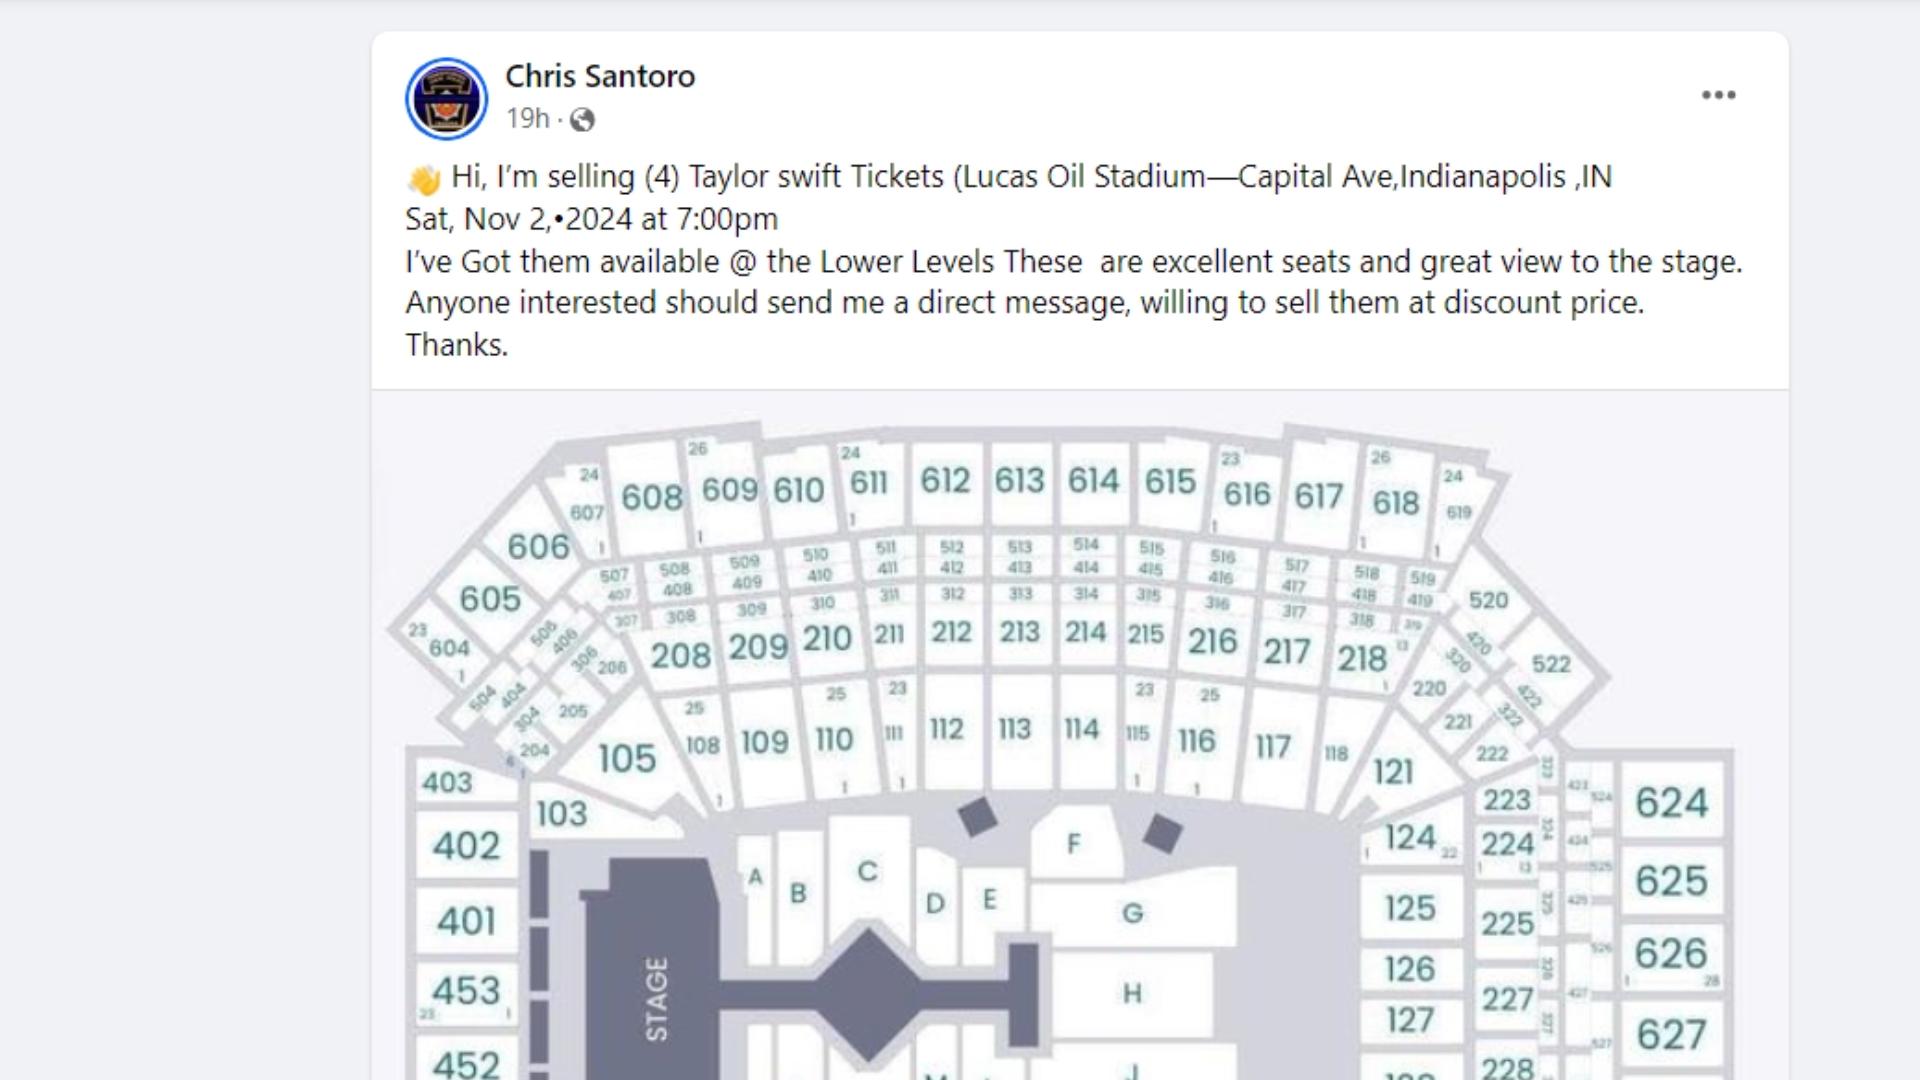 A Pennsylvania man has tried to get control back of his Facebook for a year, while the hacker tries to scam people by selling Taylor Swift tickets on his account.